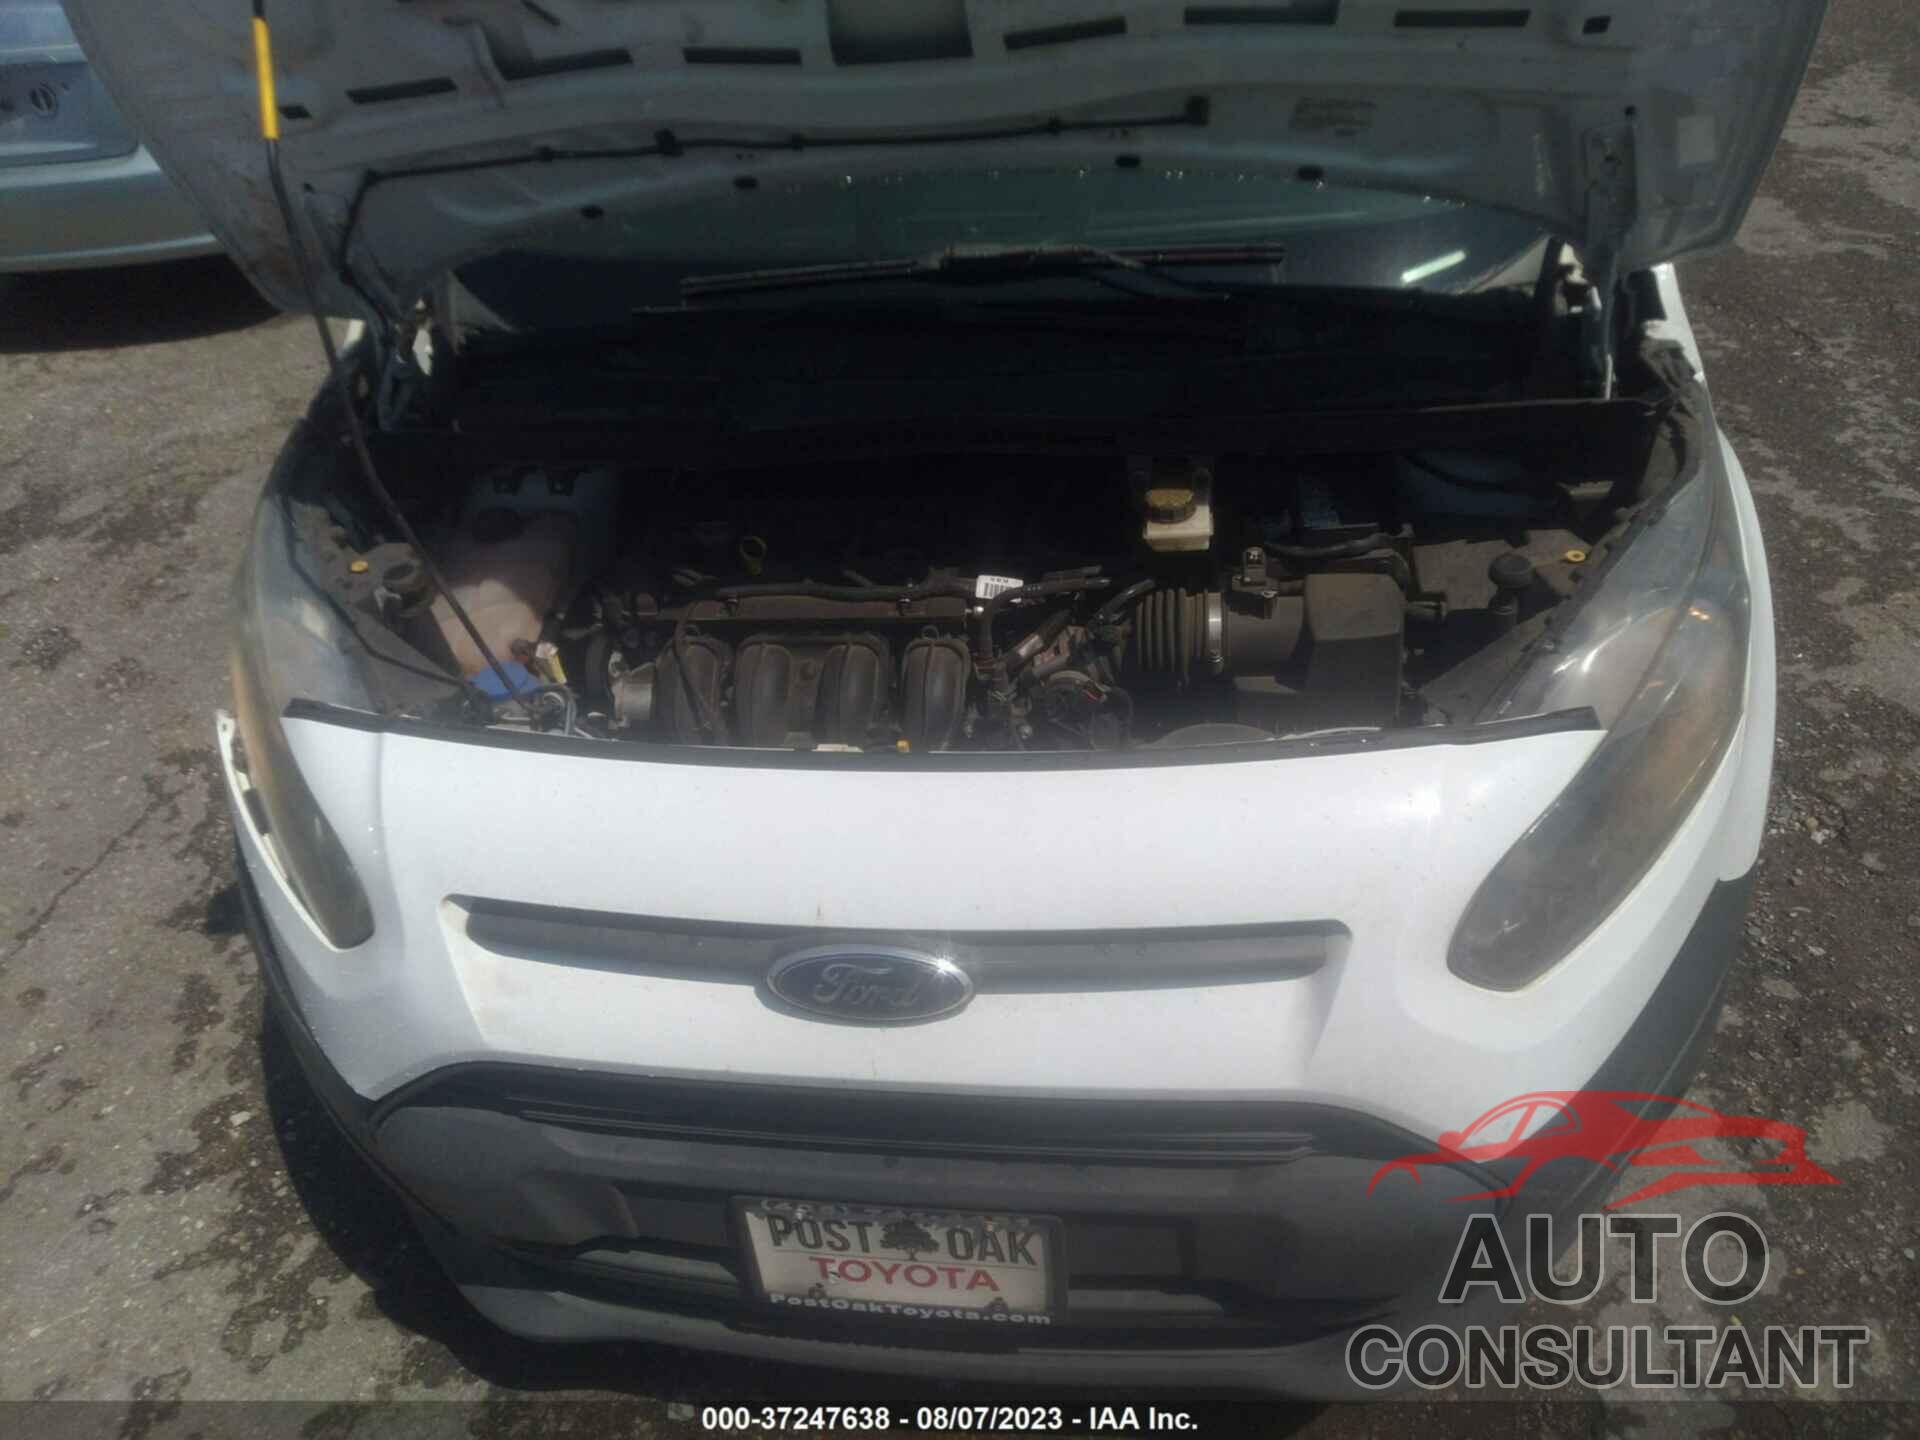 FORD TRANSIT CONNECT 2015 - NM0LS6E76F1209789